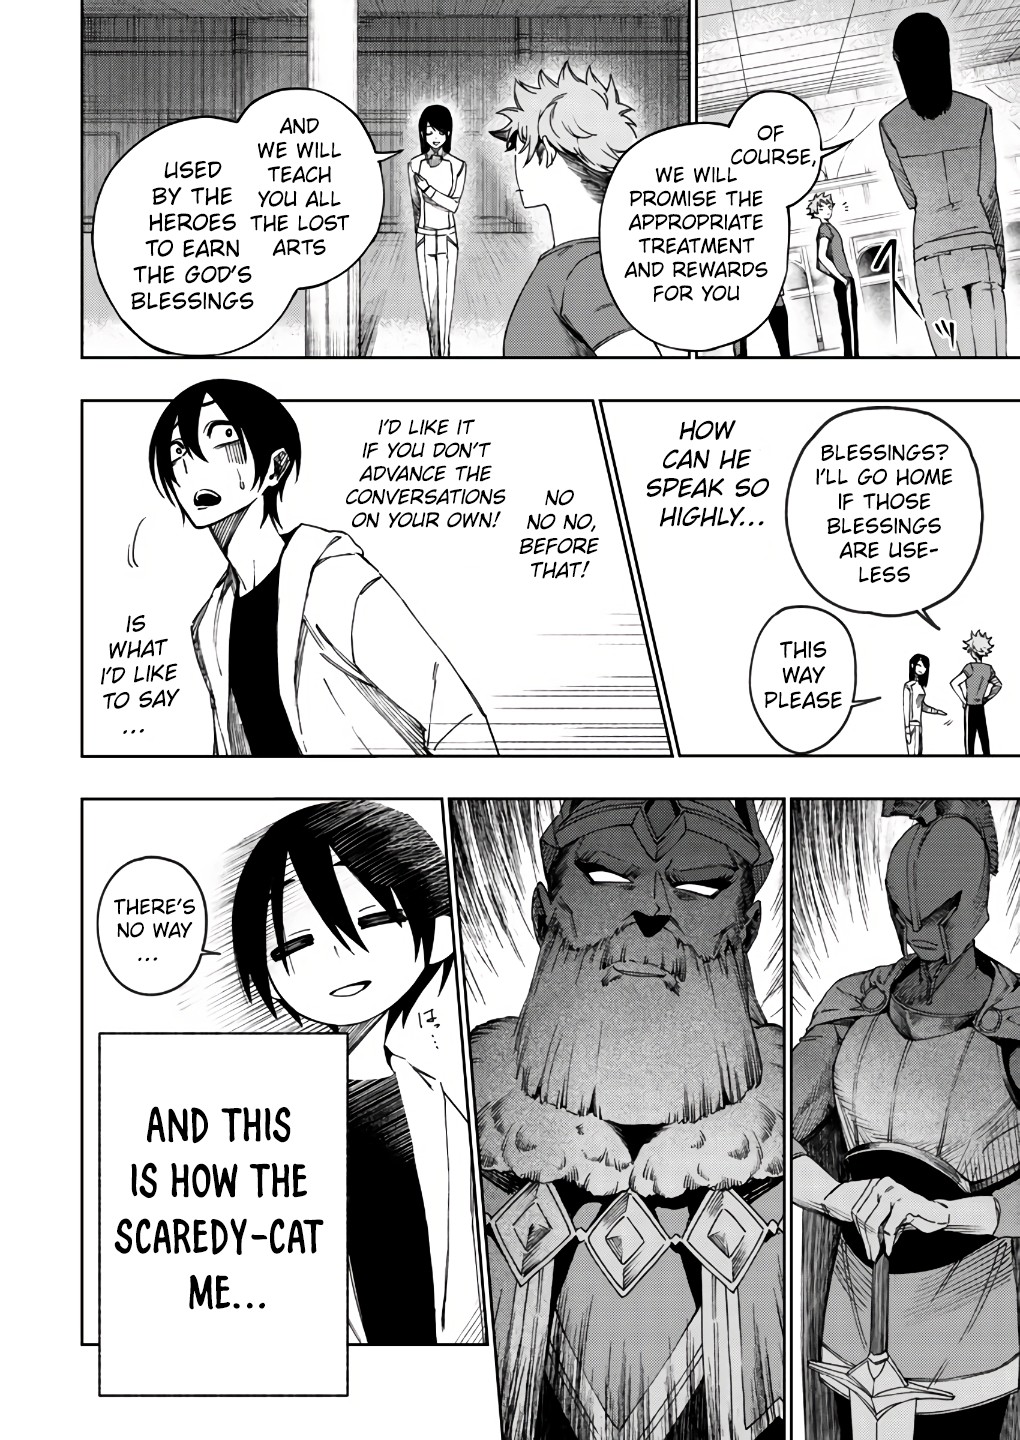 DISC] My companion is the strongest undead in another world - Chapter 1 - 2  : r/manga